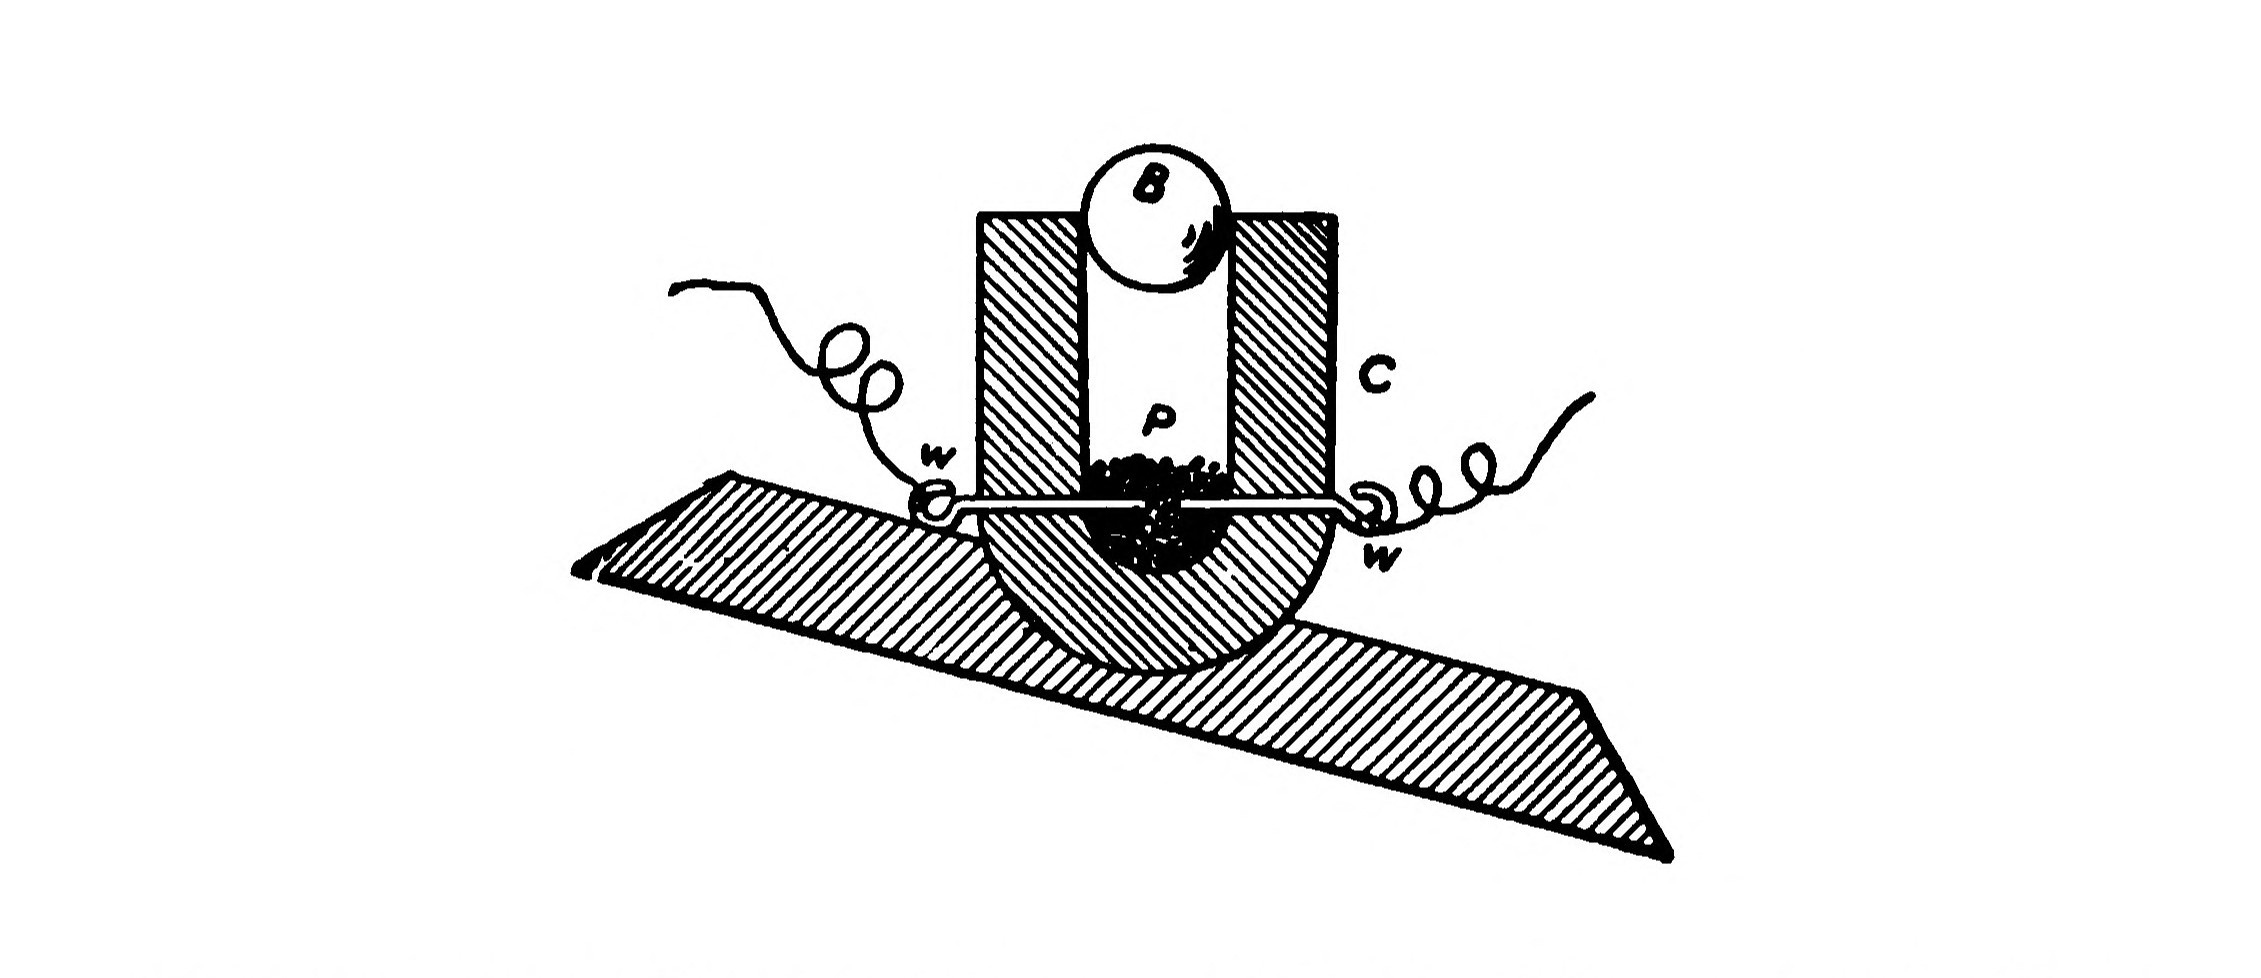 FIG. 24.—The Electric Mortar.